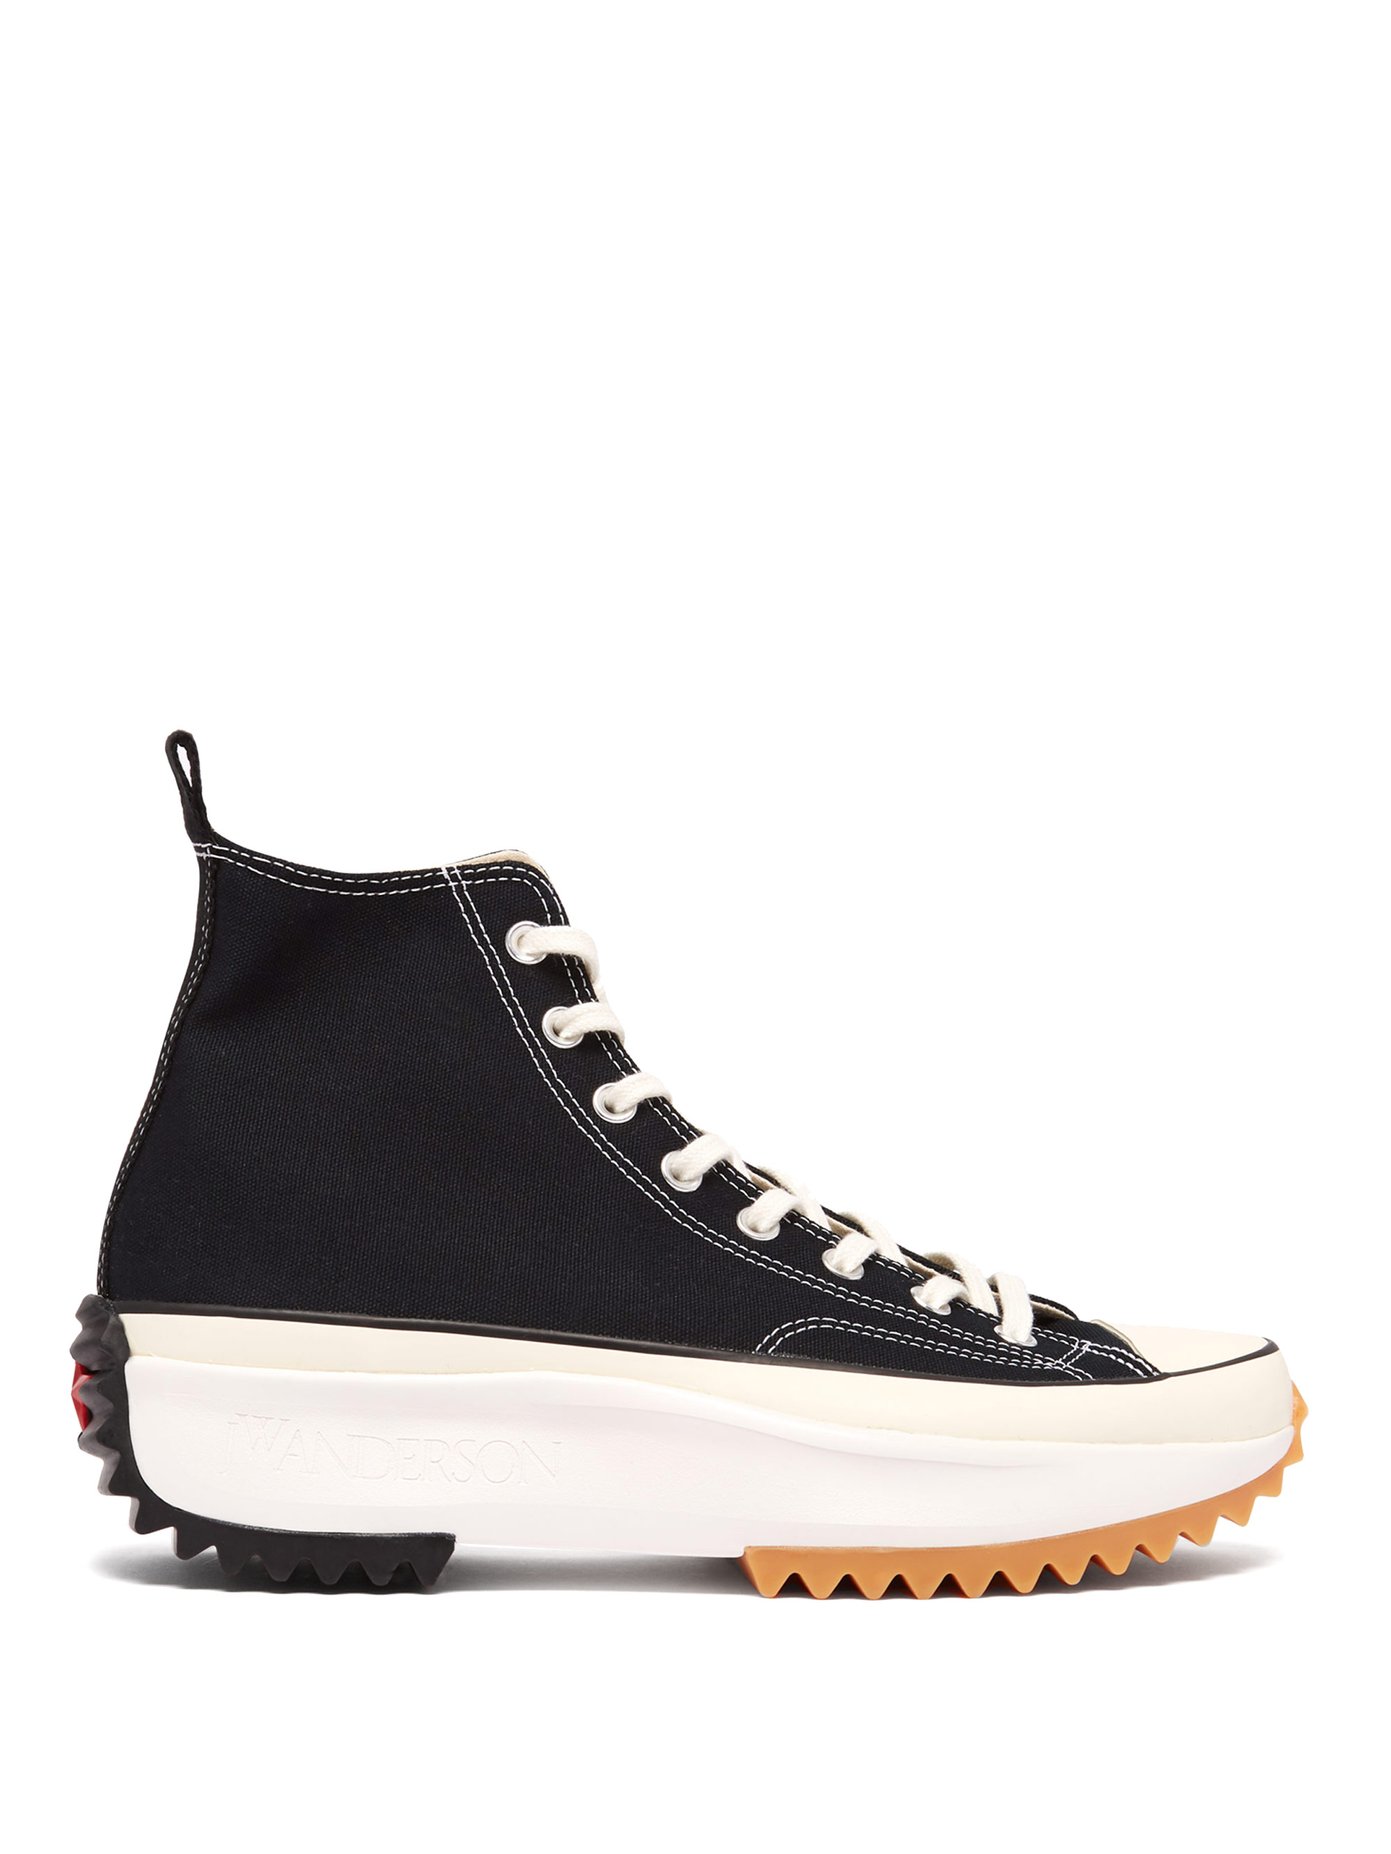 where to buy black high top converse